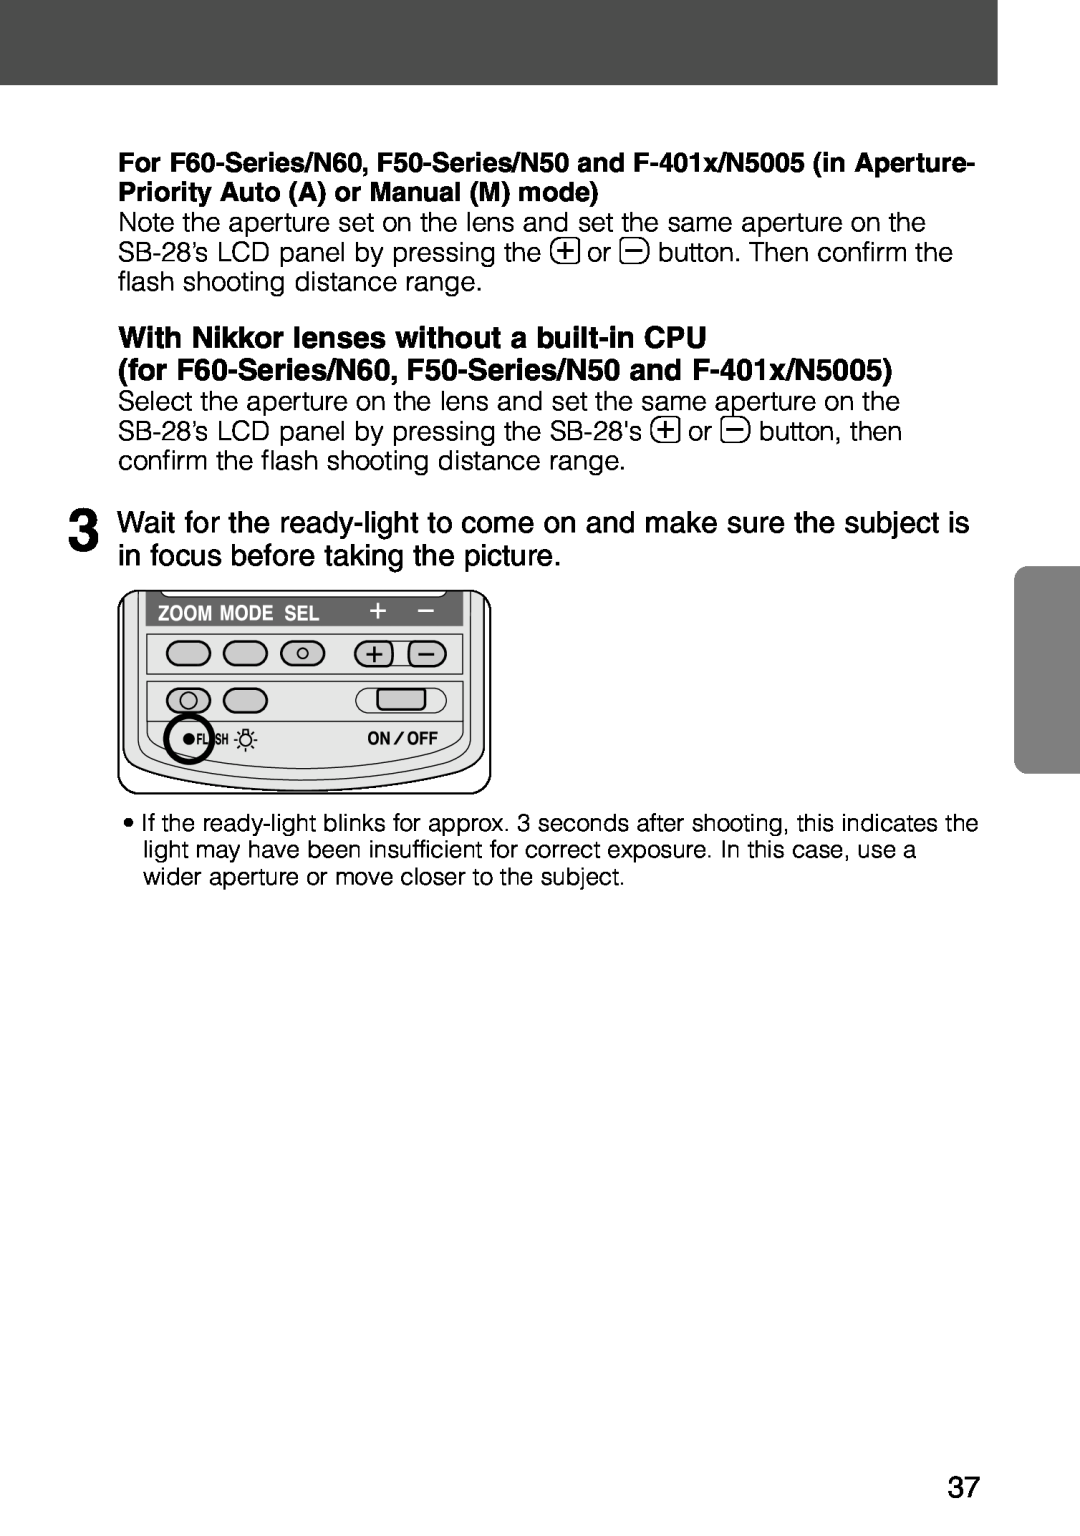 Nikon SB-28 instruction manual With Nikkor lenses without a built-inCPU 